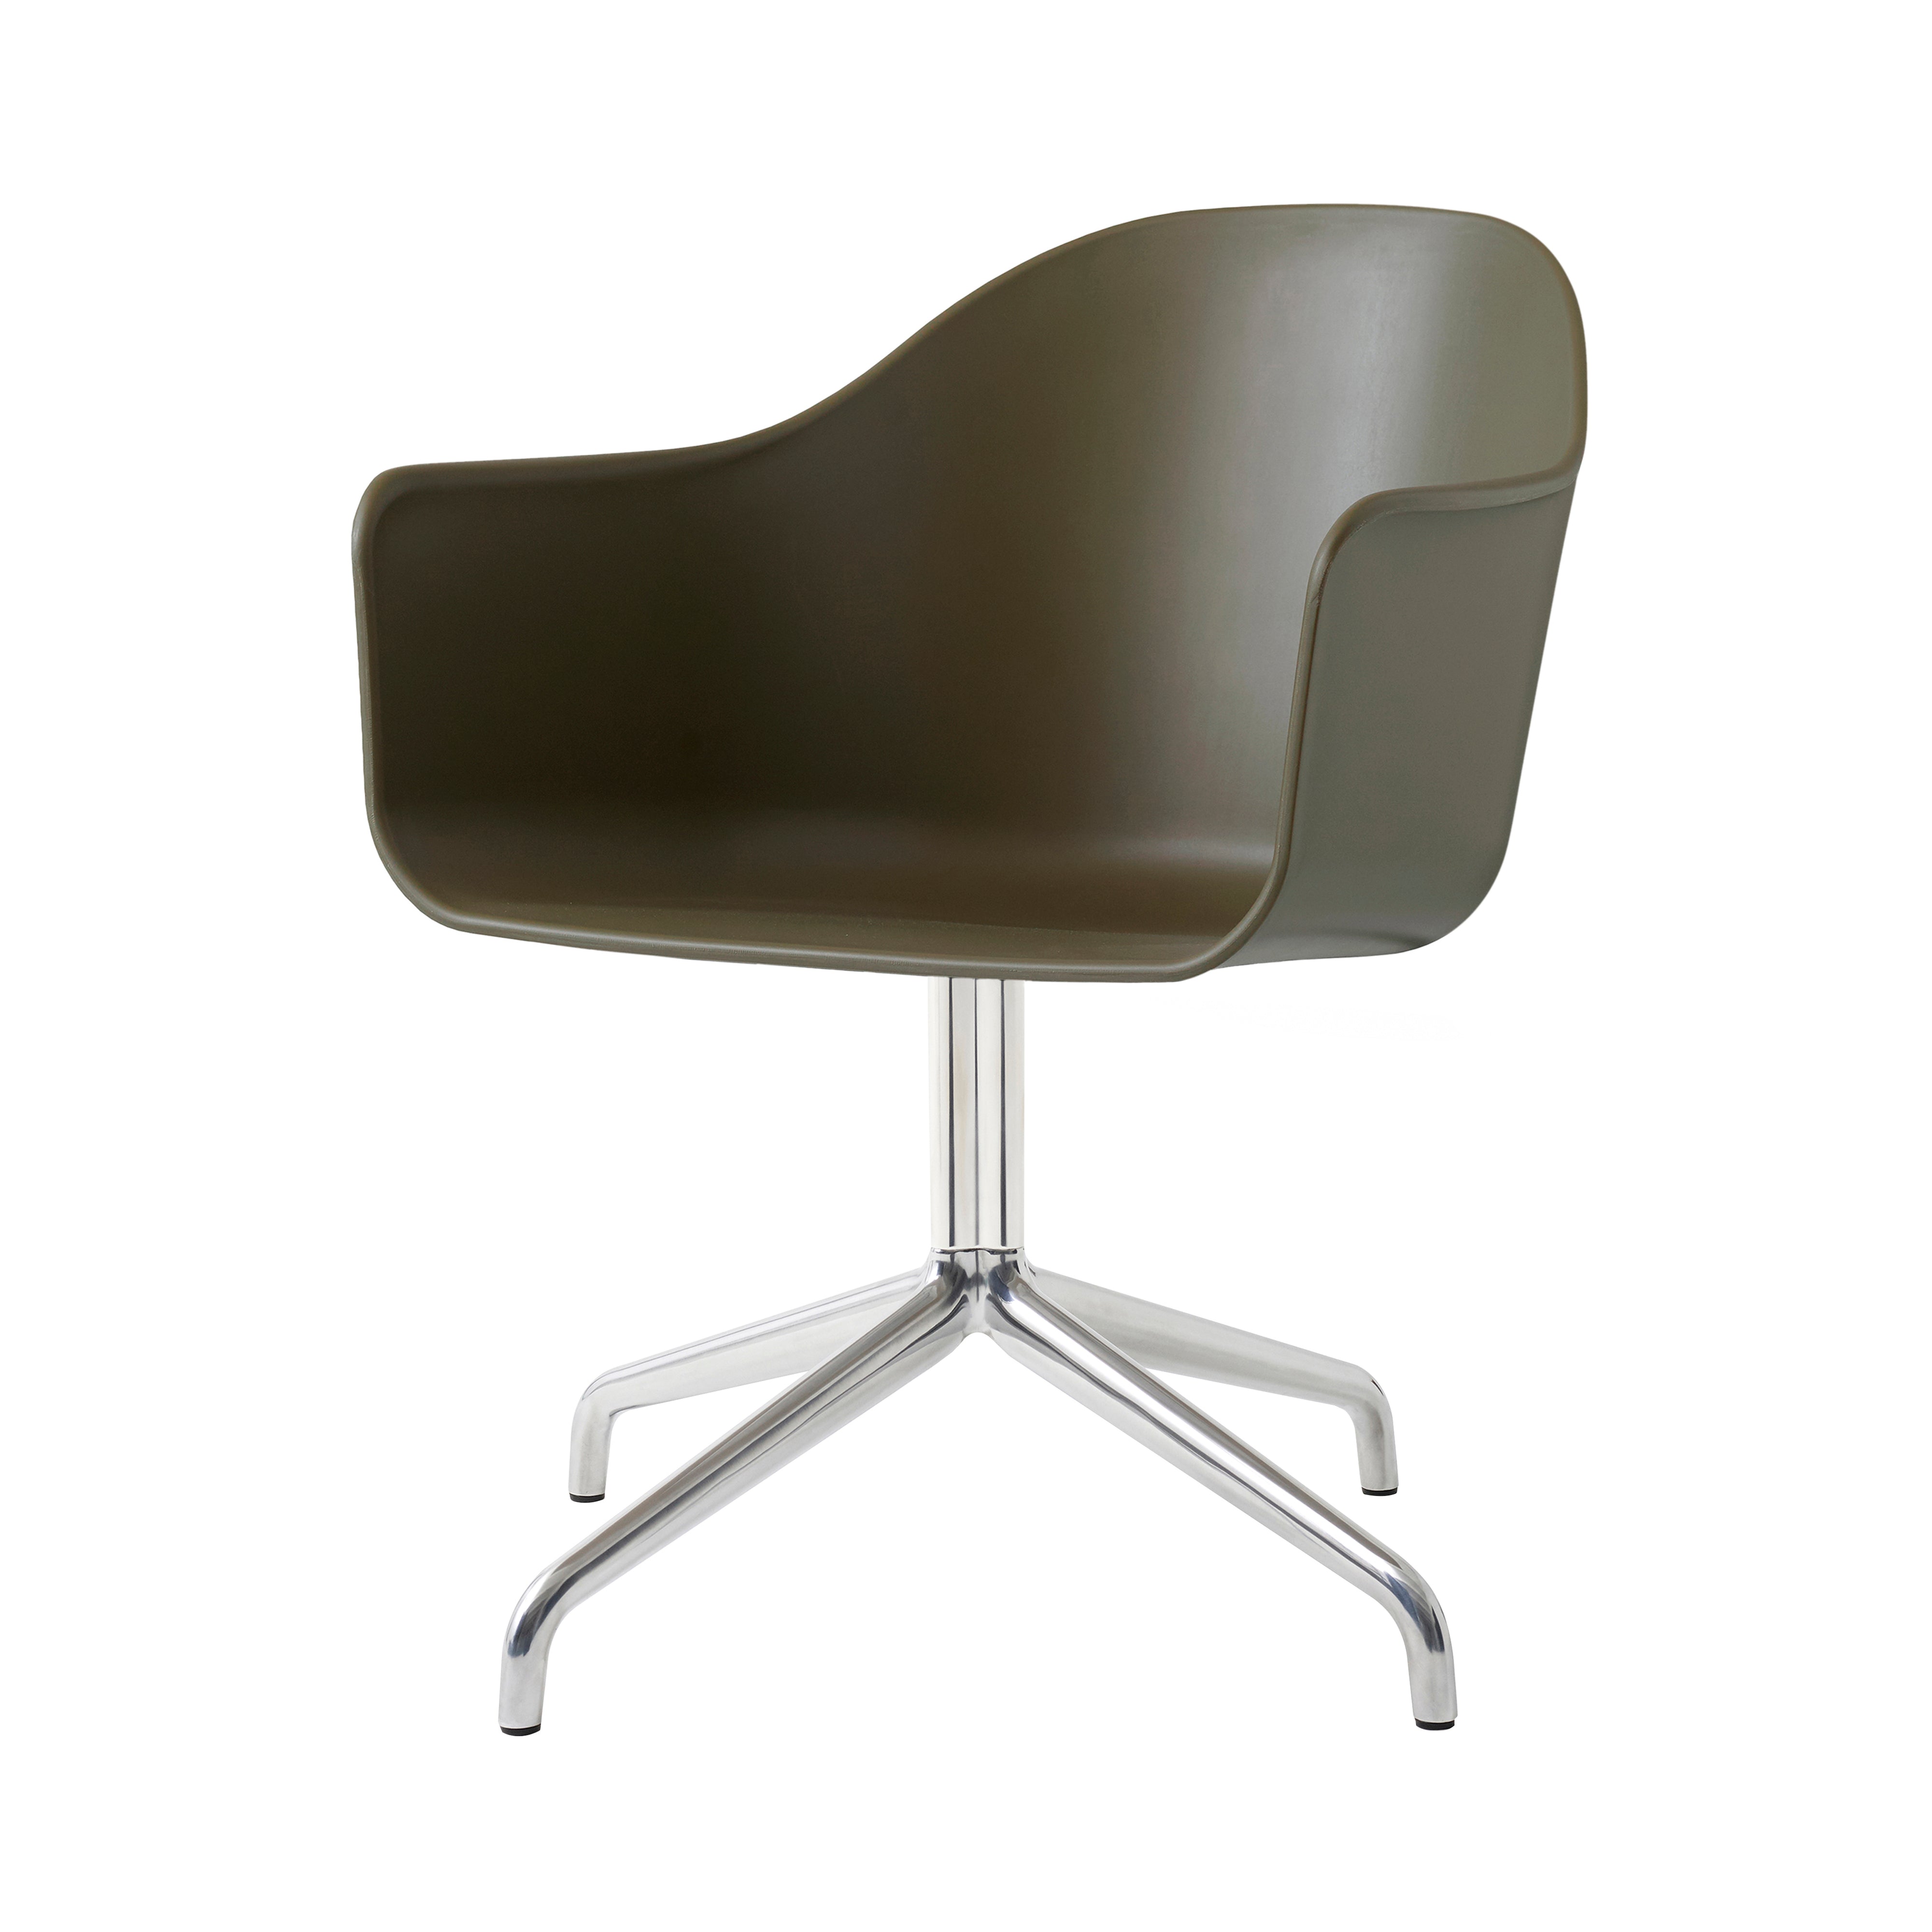 Harbour Dining Chair: Star Base + Polished Aluminum + Olive